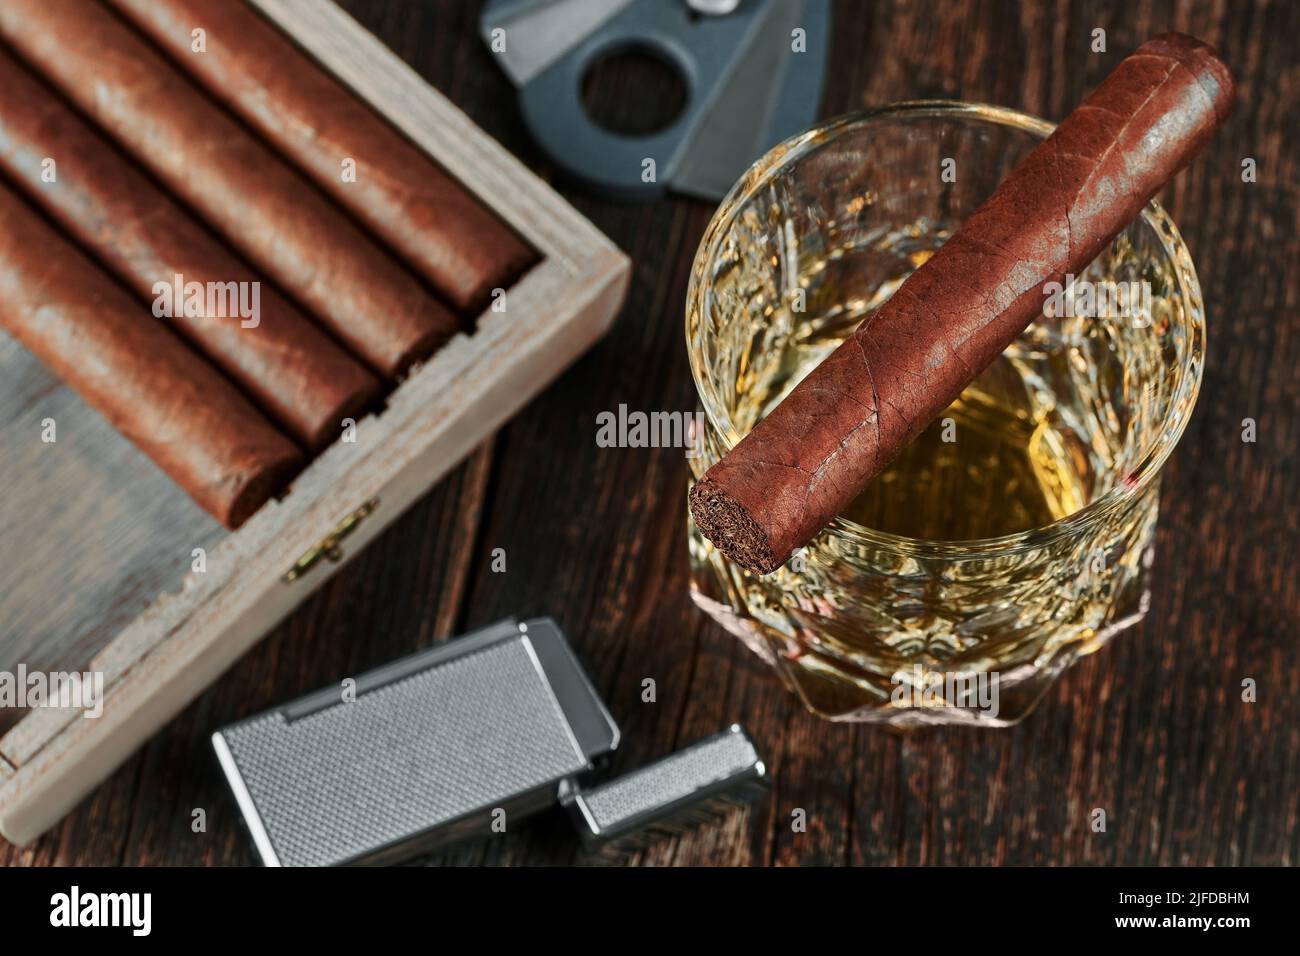 Top view of a Cuban cigar on a glass of whiskey or alcohol. Wooden table, lighter and cutter with blurred background. Stock Photo